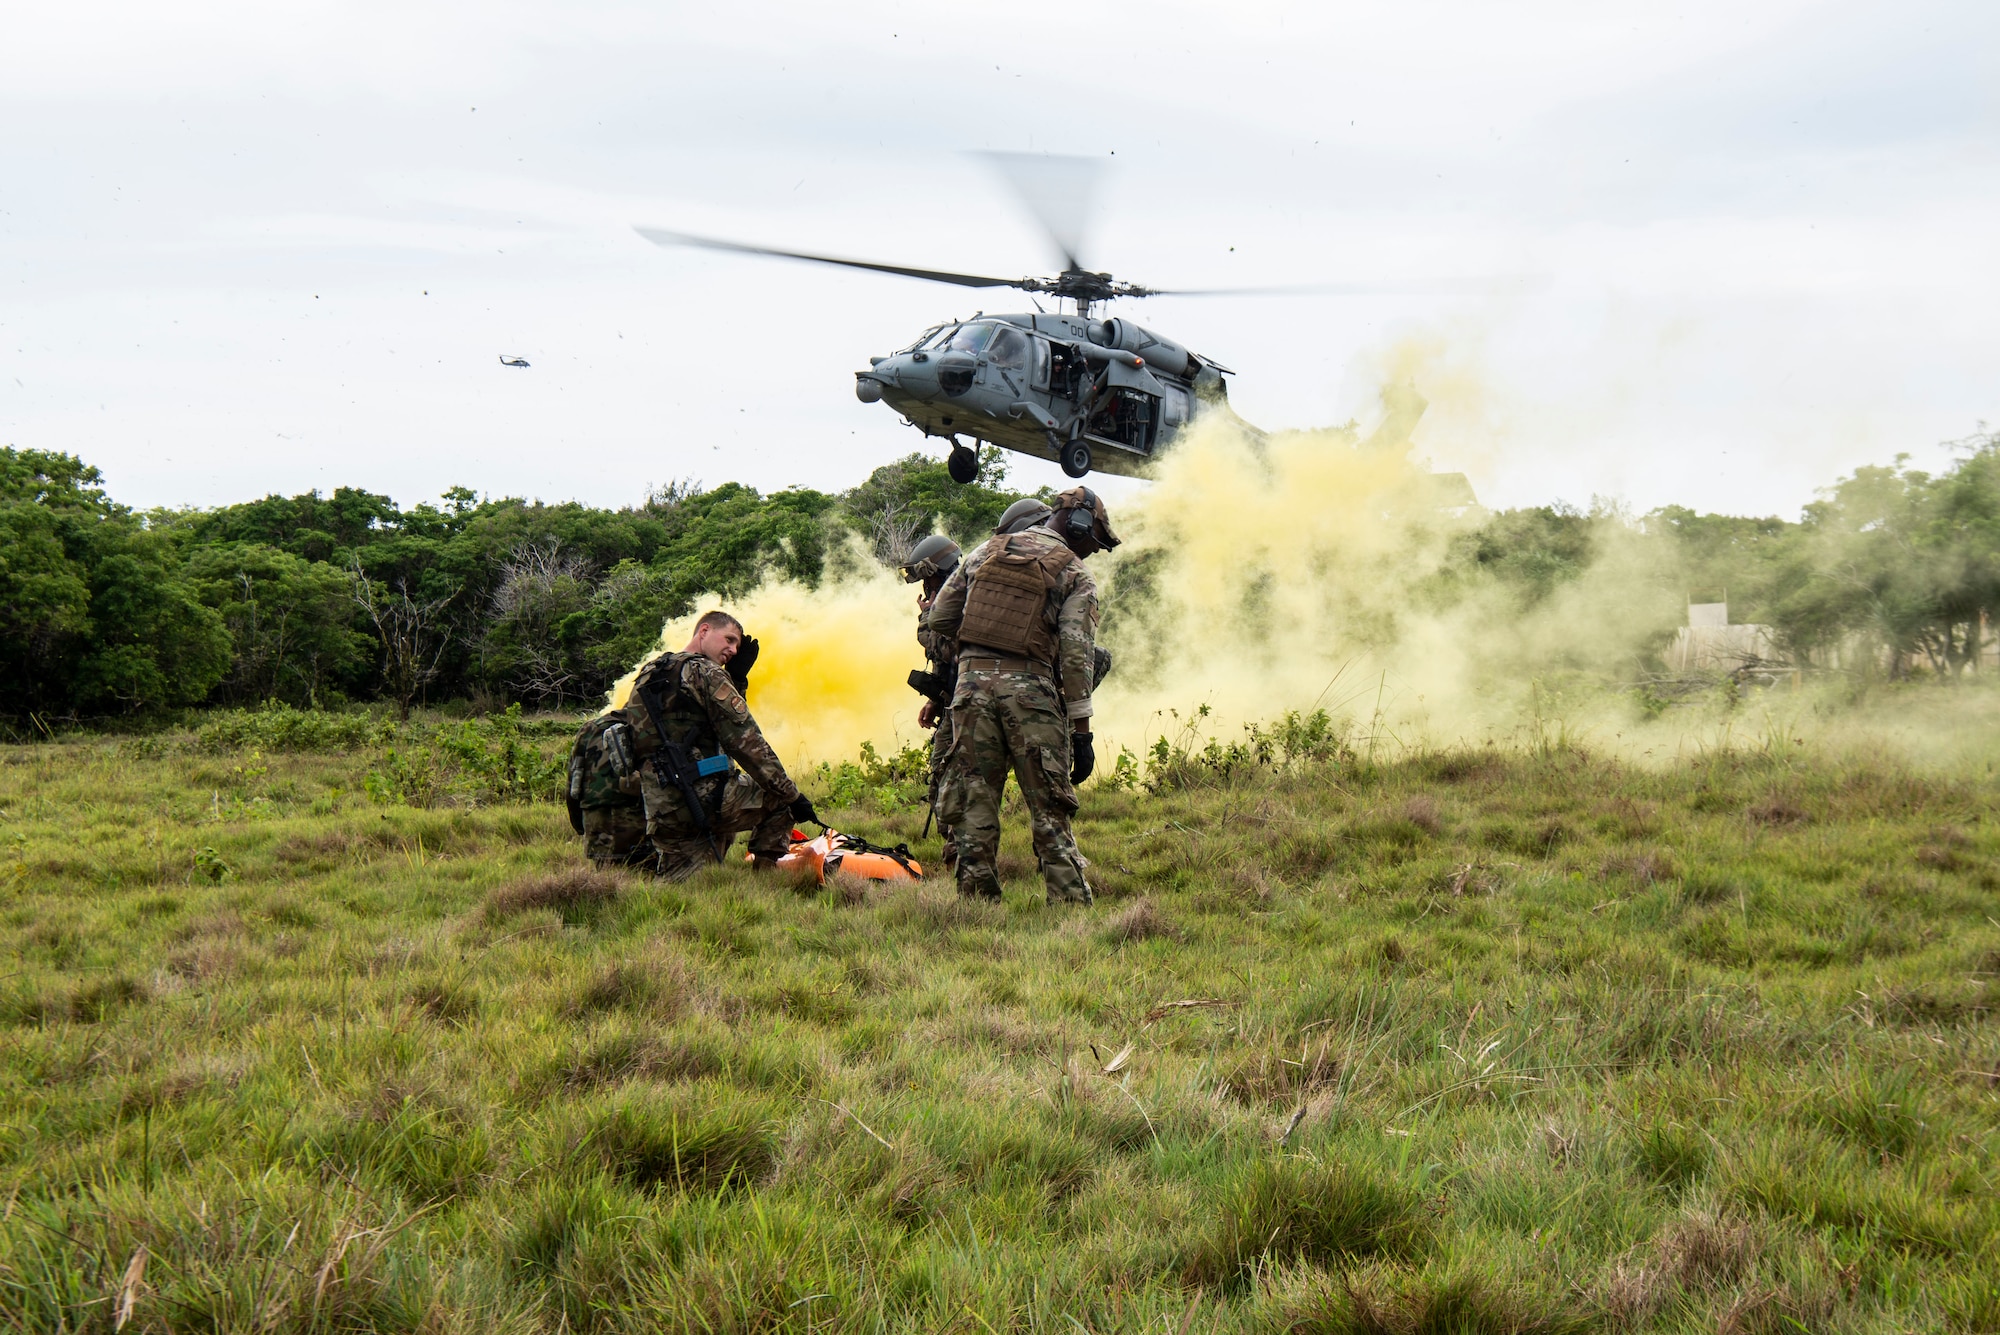 U.S. Air Force Airmen assigned to the 154th Fighter Wing, Hawaii Air National Guard wait with a “fallen comrade” in a litter to practice medical evacuation with U.S. Navy Helicopter Sea Combat Squadron 25 as part of a combat readiness training course during Operation Pacific Iron 2021, July 20, 2021, at Andersen Air Force Base, Guam.